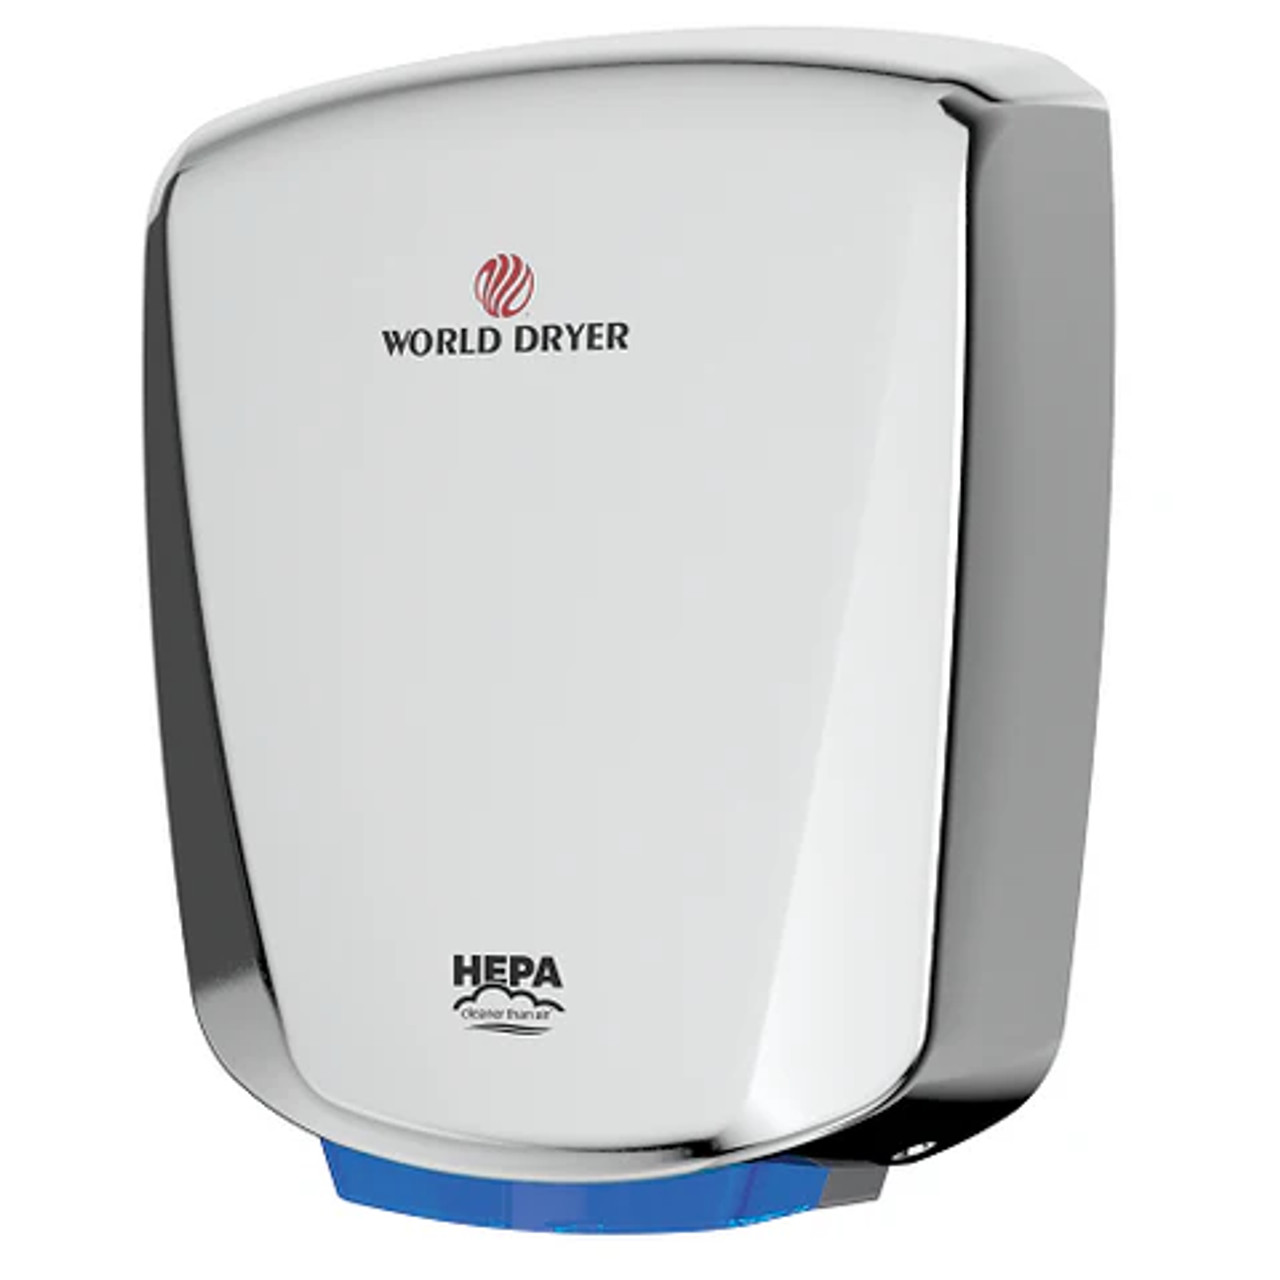 World Dryer Automatic Hand Dryer - 12 Second Dry Time, Polished Stainless Steel - Chicken Pieces